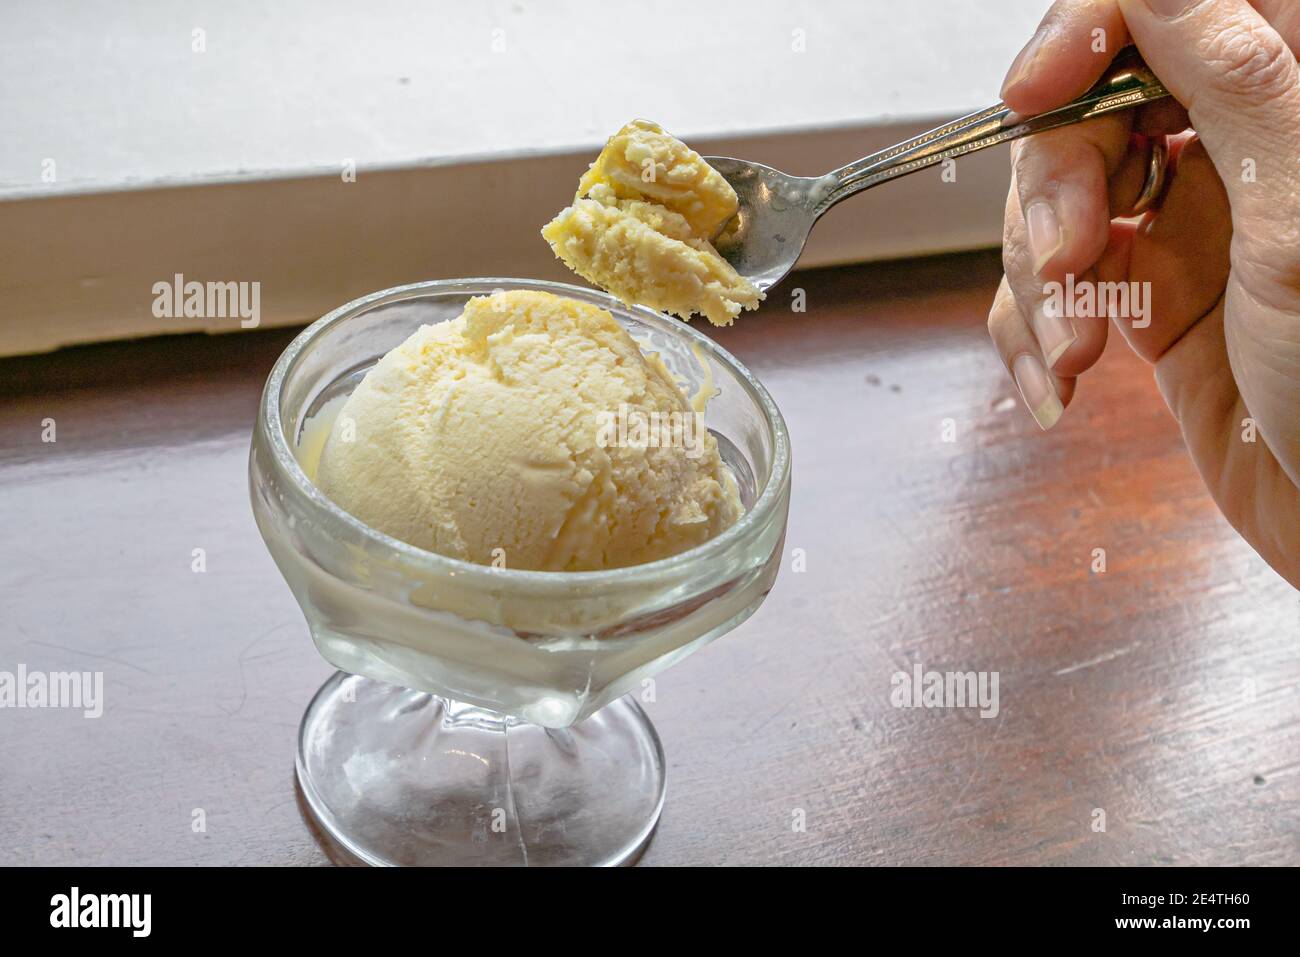 https://c8.alamy.com/comp/2E4TH60/the-close-up-of-tasty-homemade-cool-vanilla-ice-cream-scoop-in-glass-cup-on-vintage-wood-table-background-2E4TH60.jpg